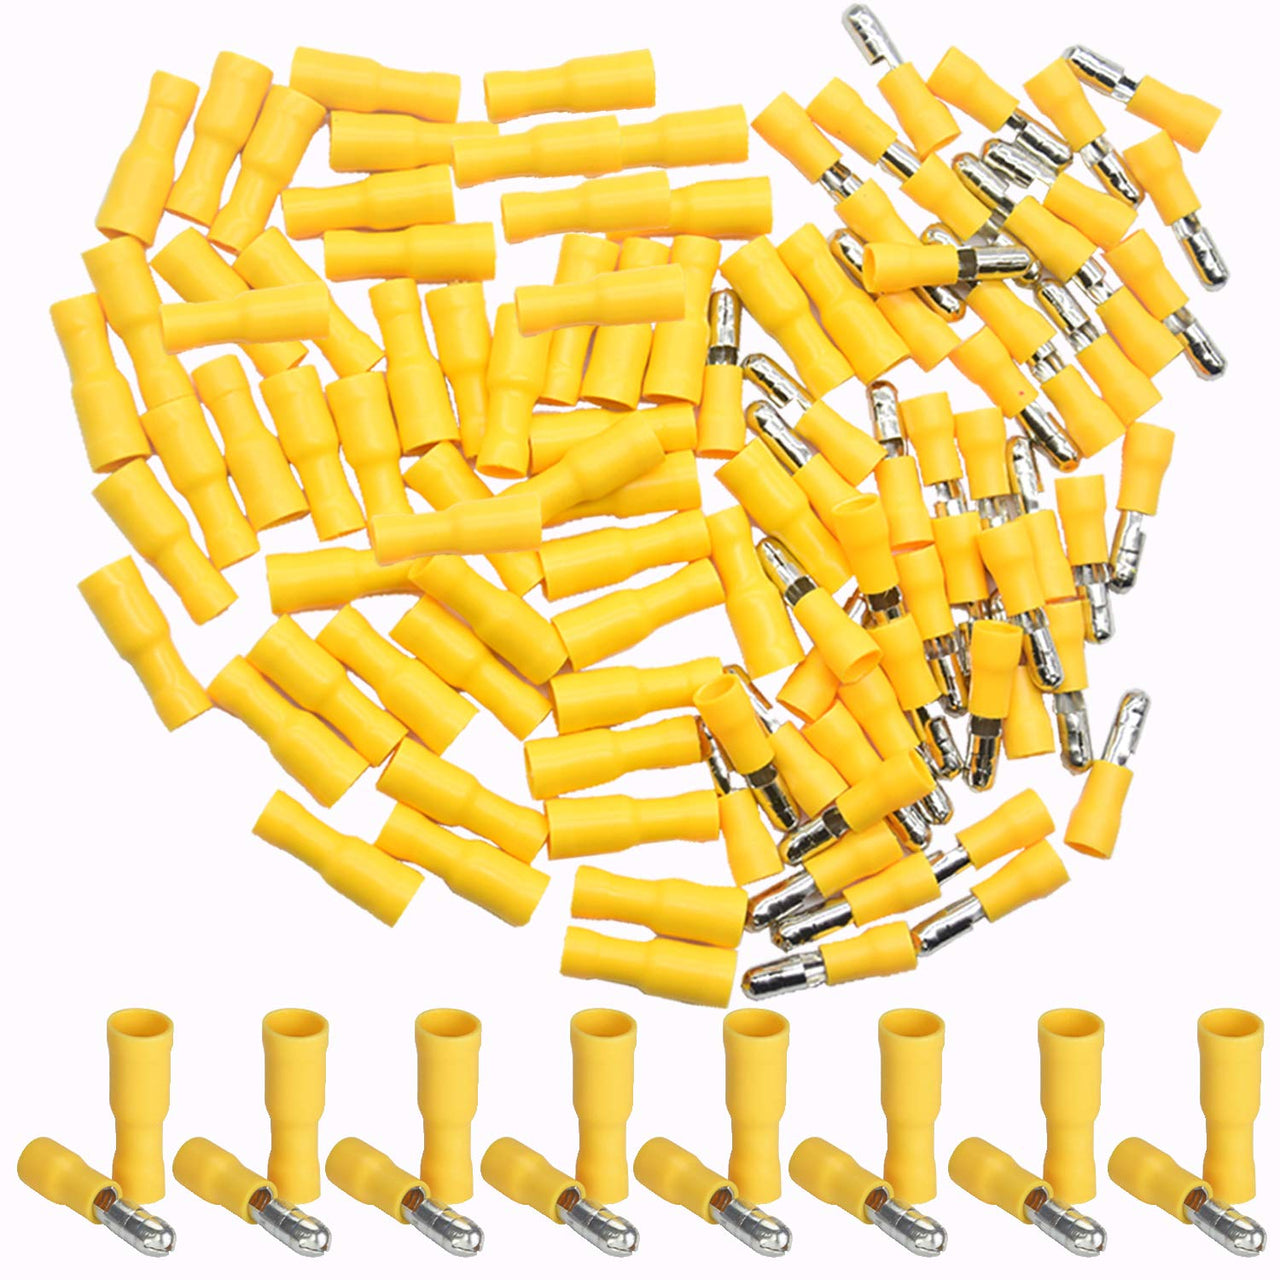 XP Audio 100Pcs 12-10 AWG of Yellow Insulated Female Male Bullet Connector Quick Splice Wire Terminals Wire Crimp Connectors